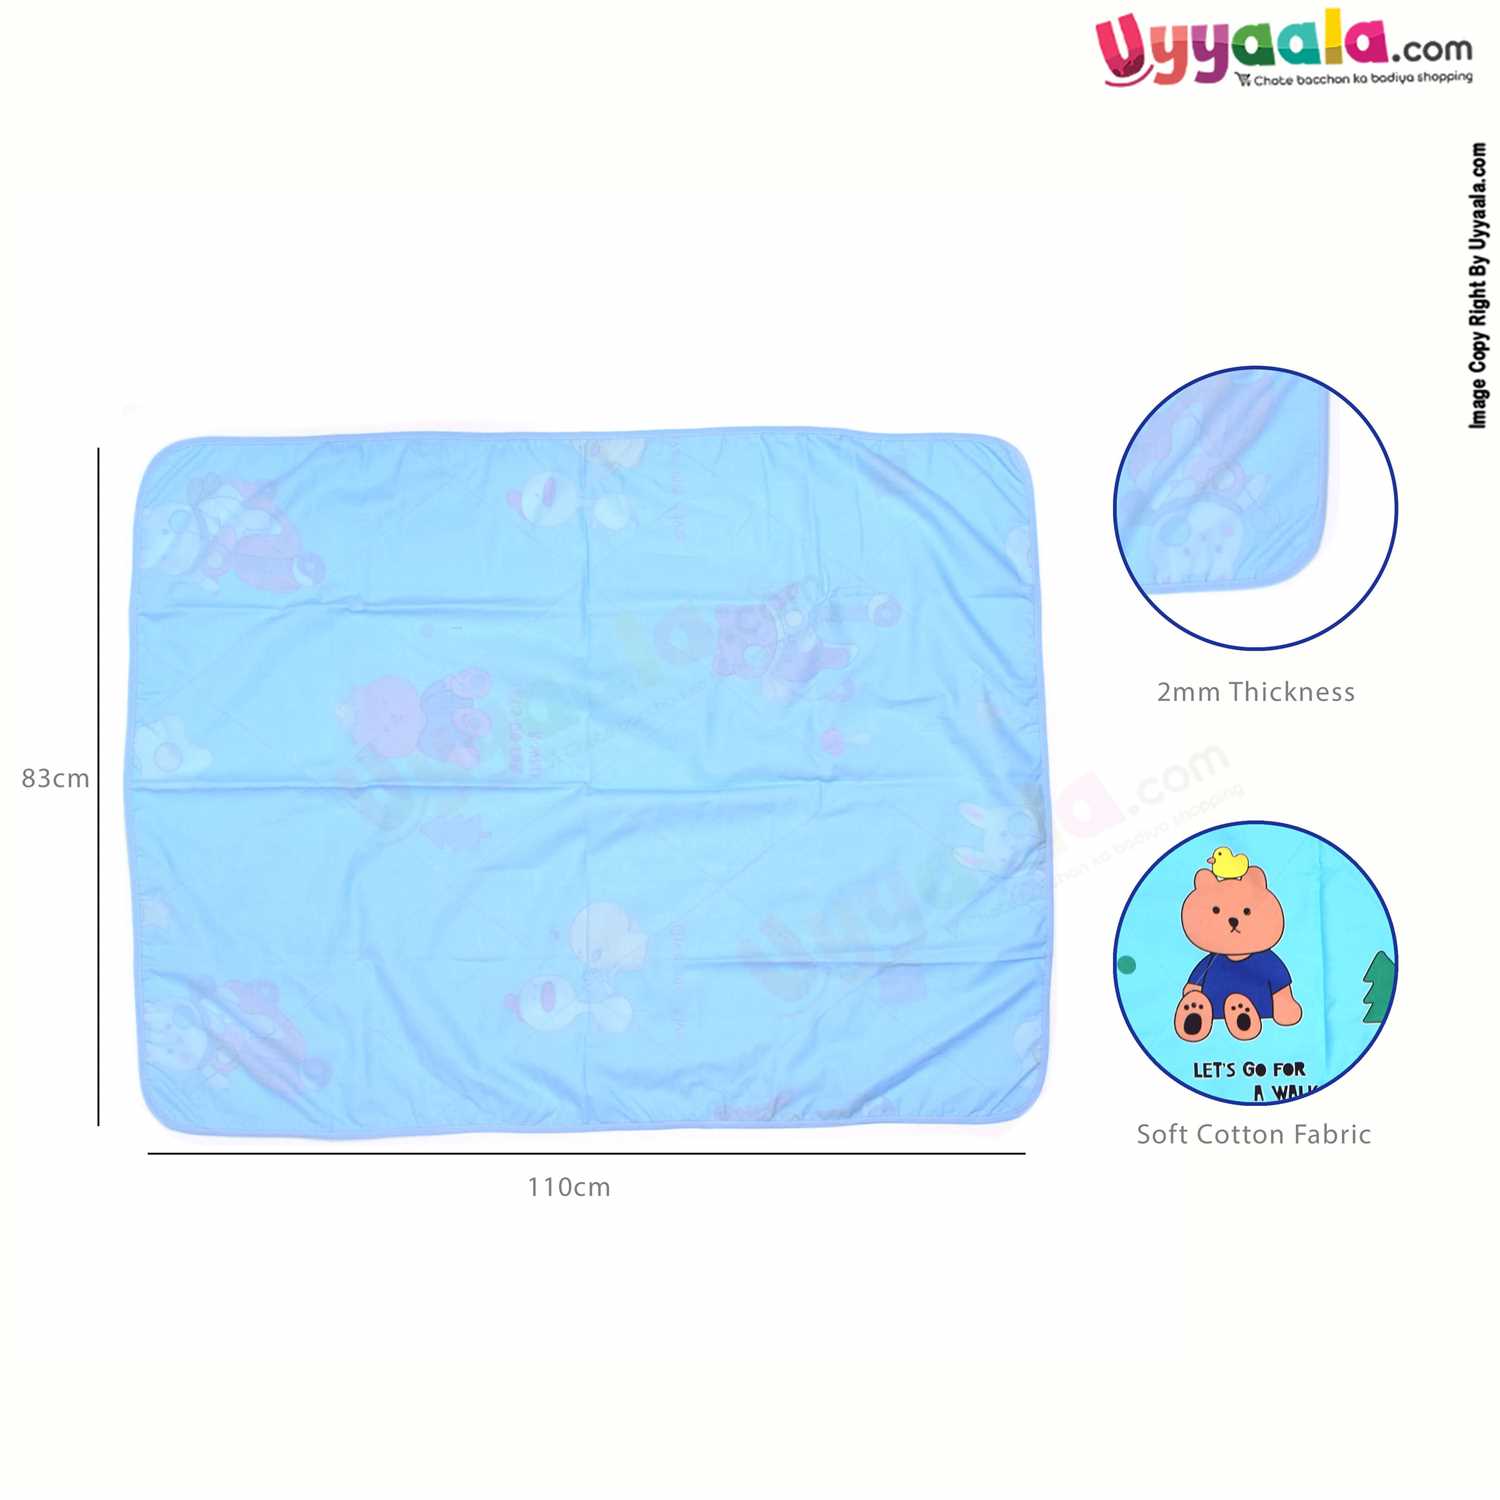 Double Layered Cotton Blanket with Teddy Bear Print for Babies 0-24m Age, Size (110*83cm)- Blue